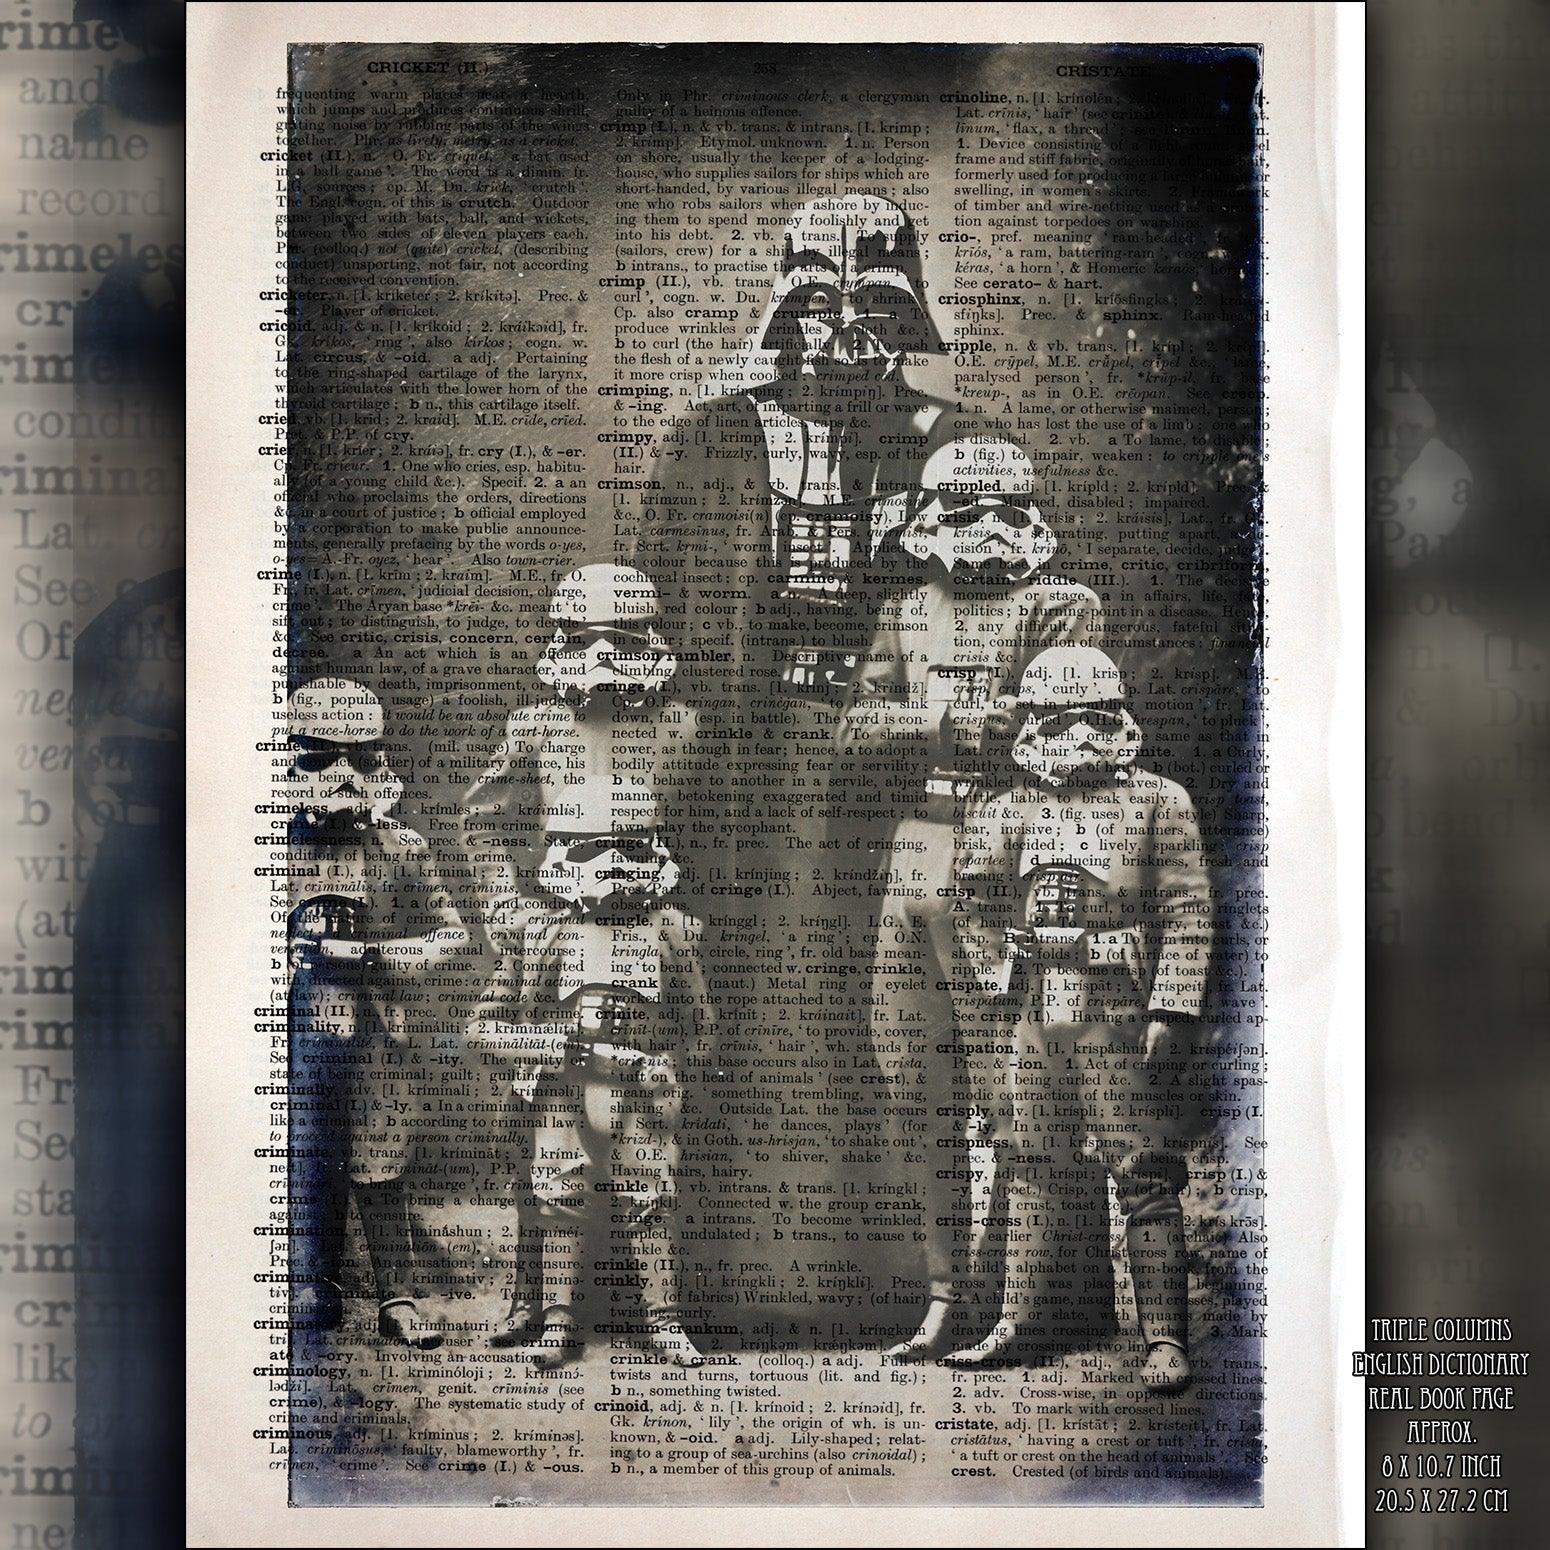 Vader Scout Camp - Victorian Gothic Art on Vintage Dictionary Page - ArtCursor